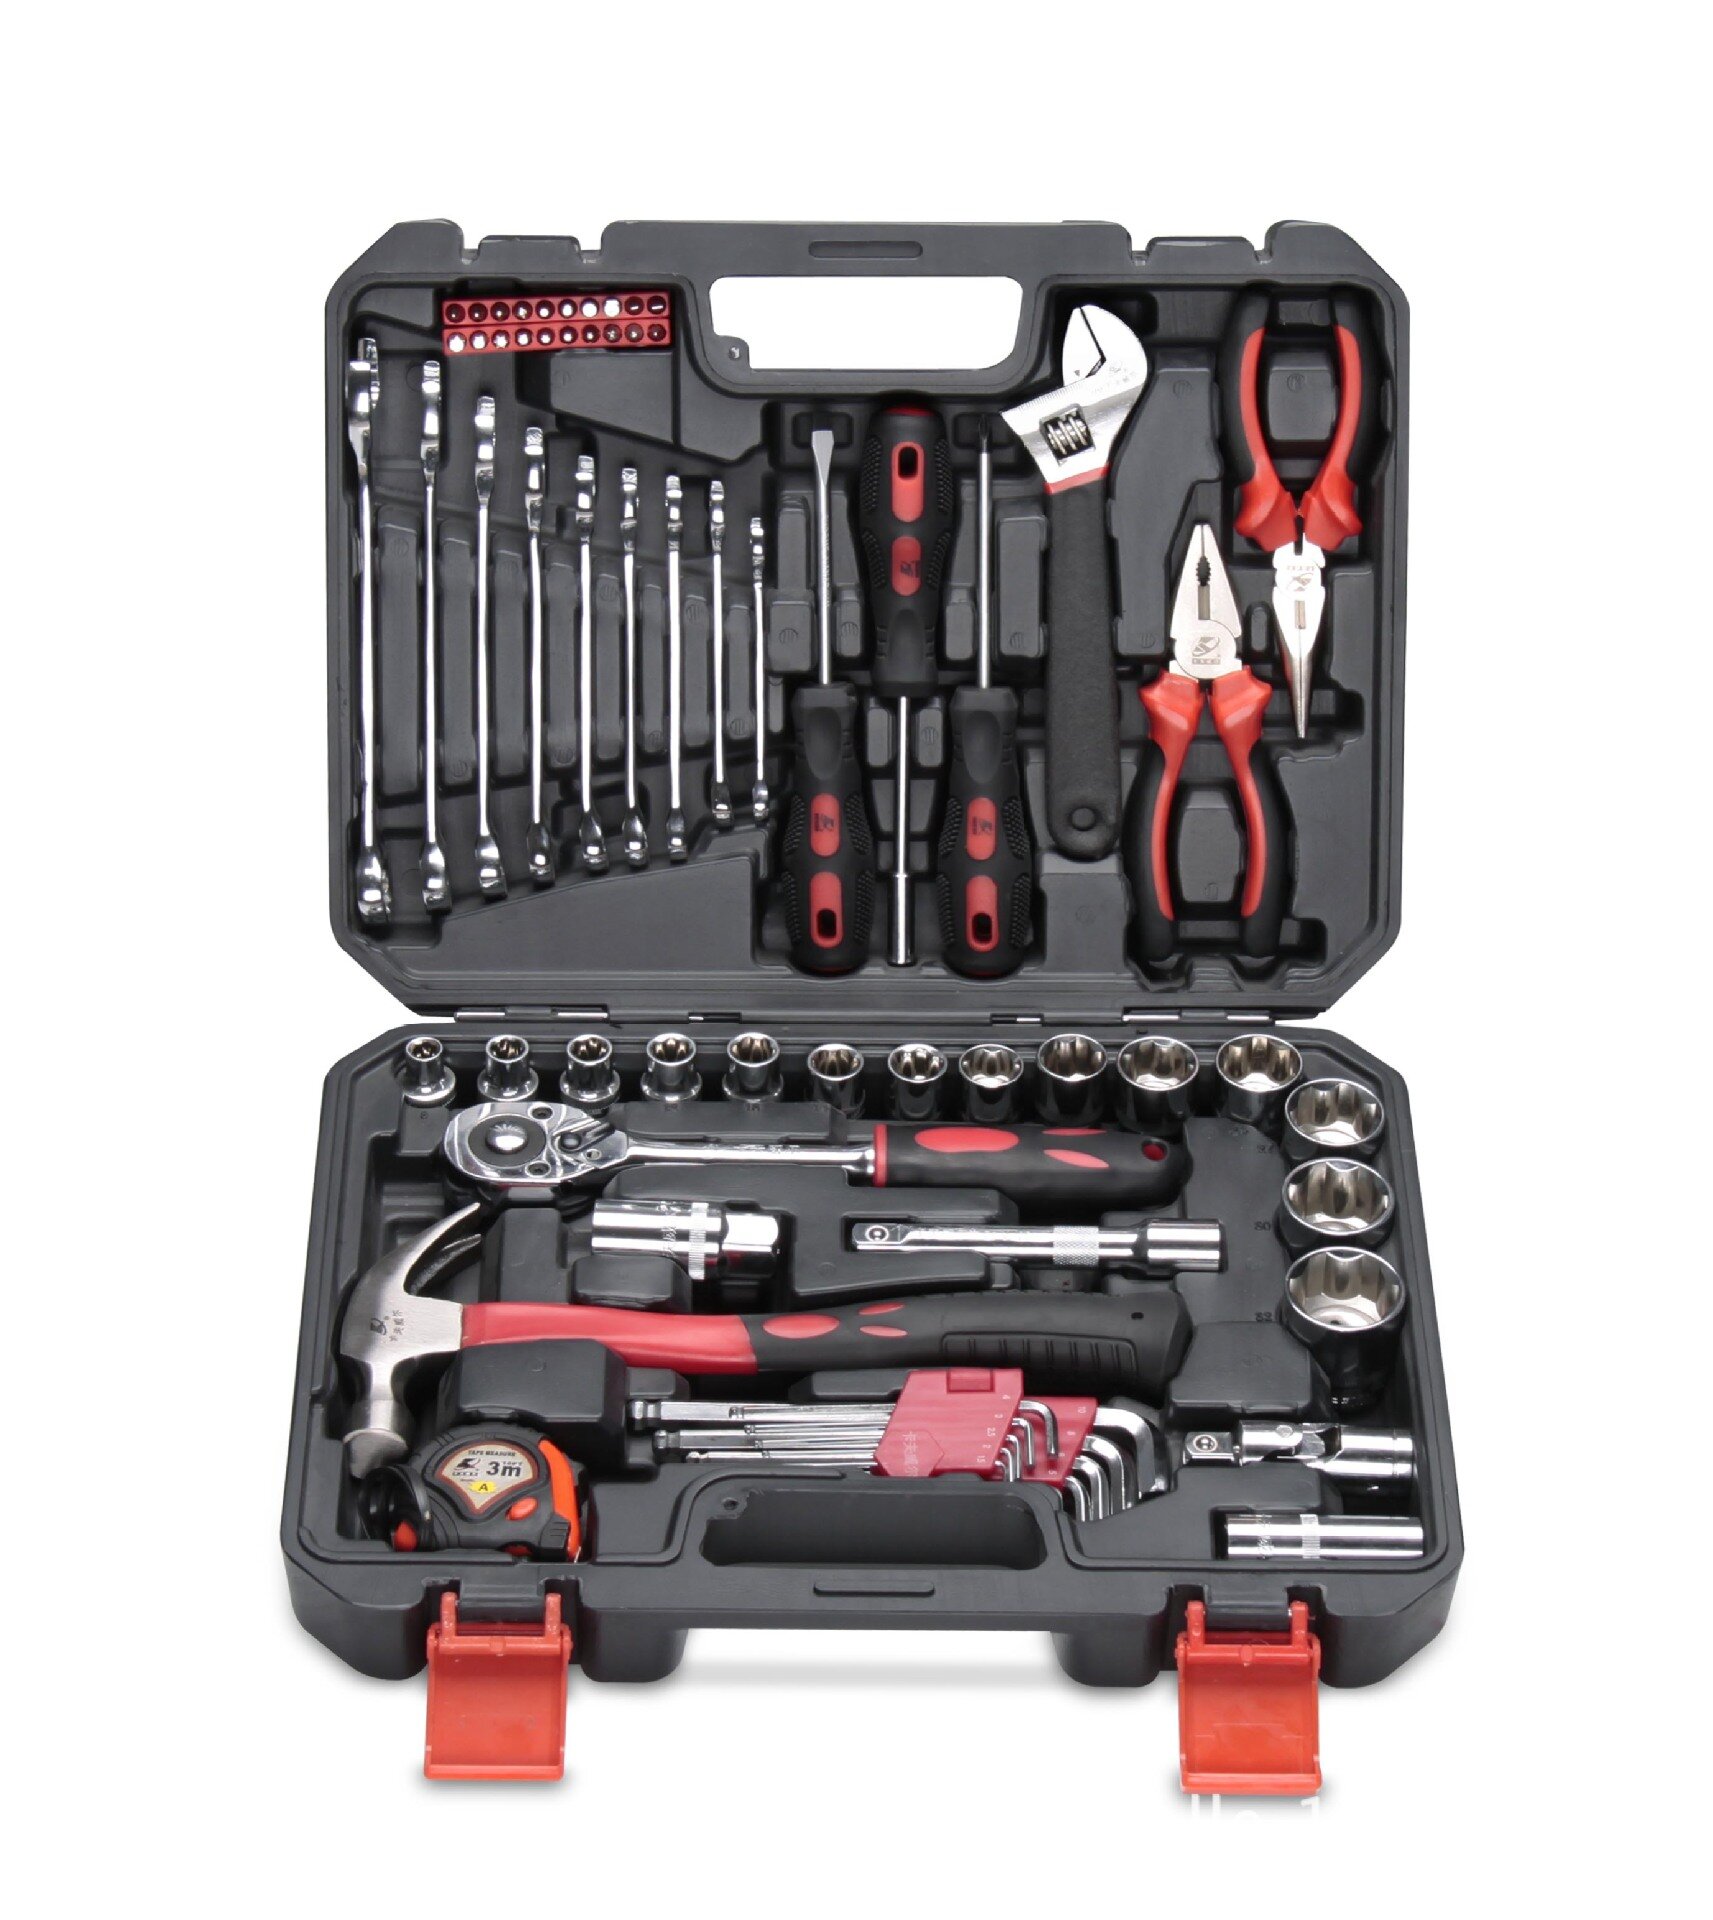 

KAFUWELL H13045A 65pcs Household Hardware Tools Kit Auto Repair Socket Wrench Screwdriver Combination Manual Tools Kit